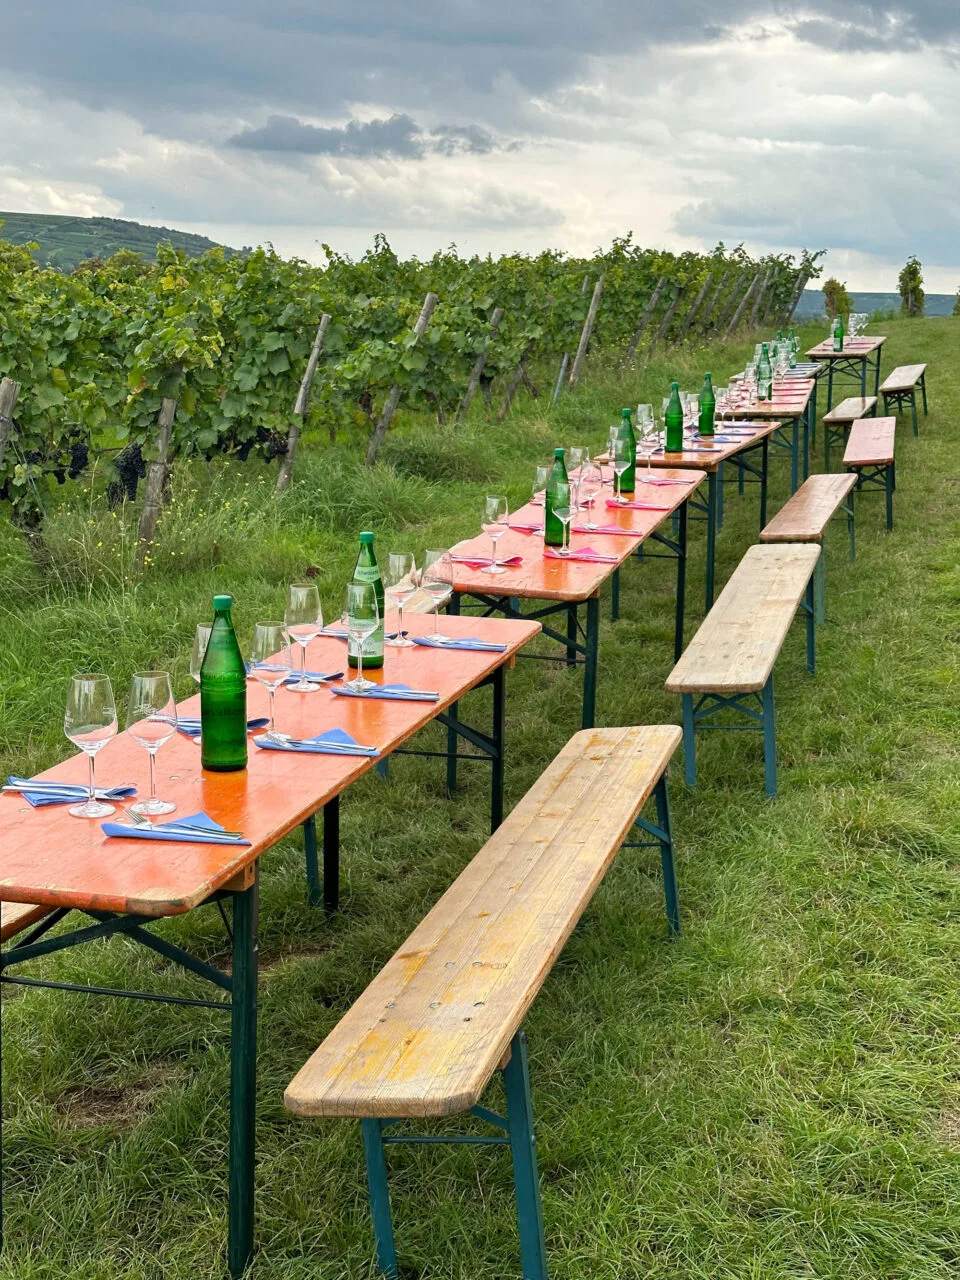 Tables set up for having lunch in the vineyard.